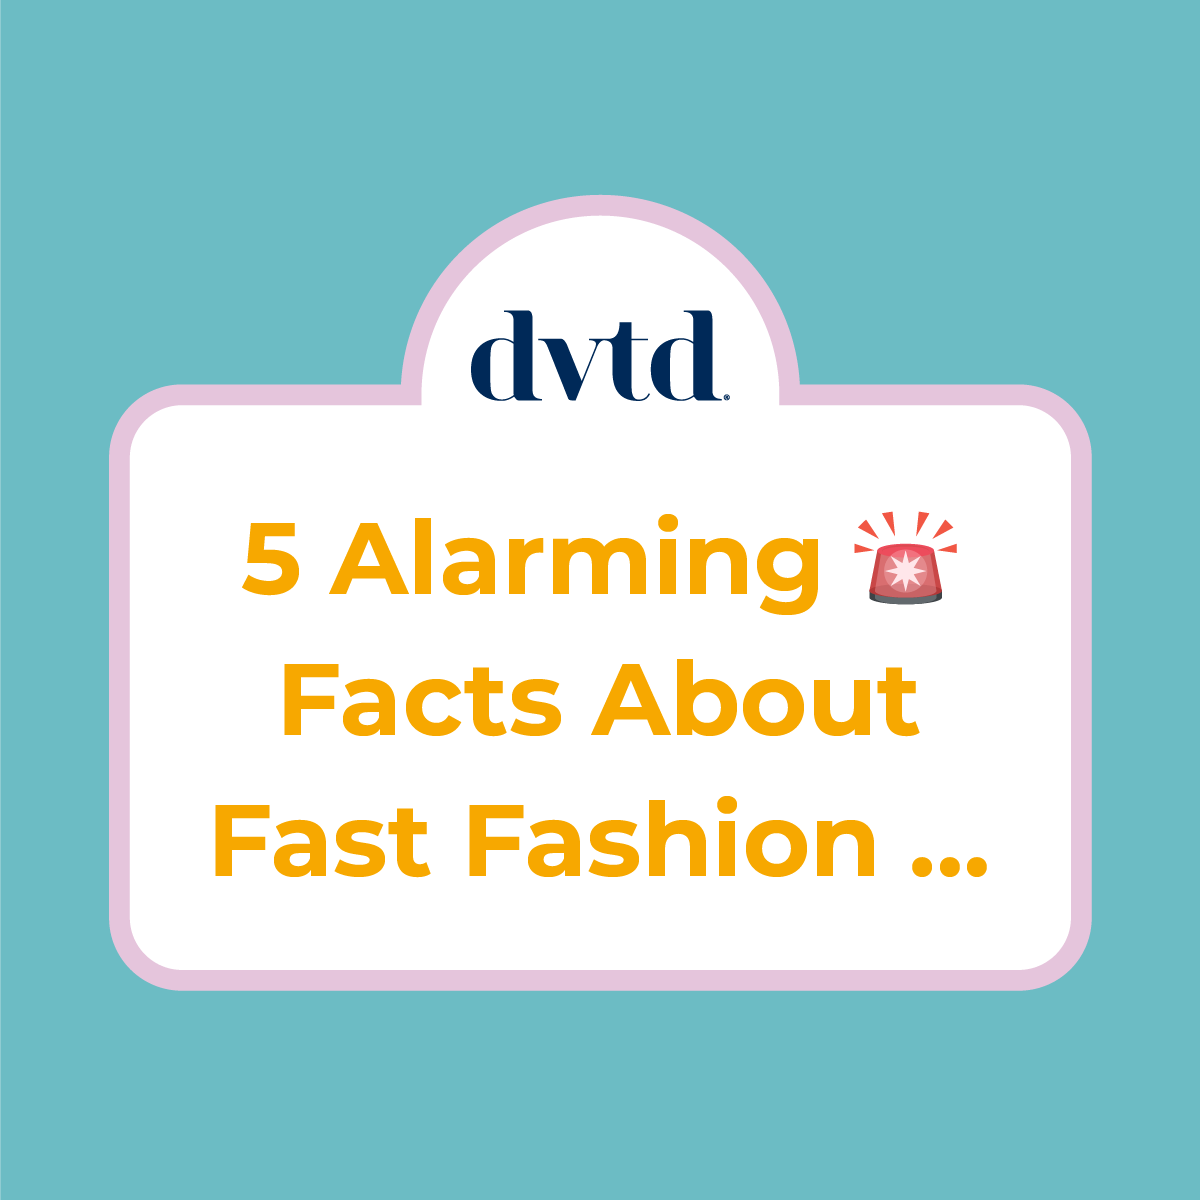 NEW_DVTD_GOEX_SM_Graphics_Fast-Fashion-1.png